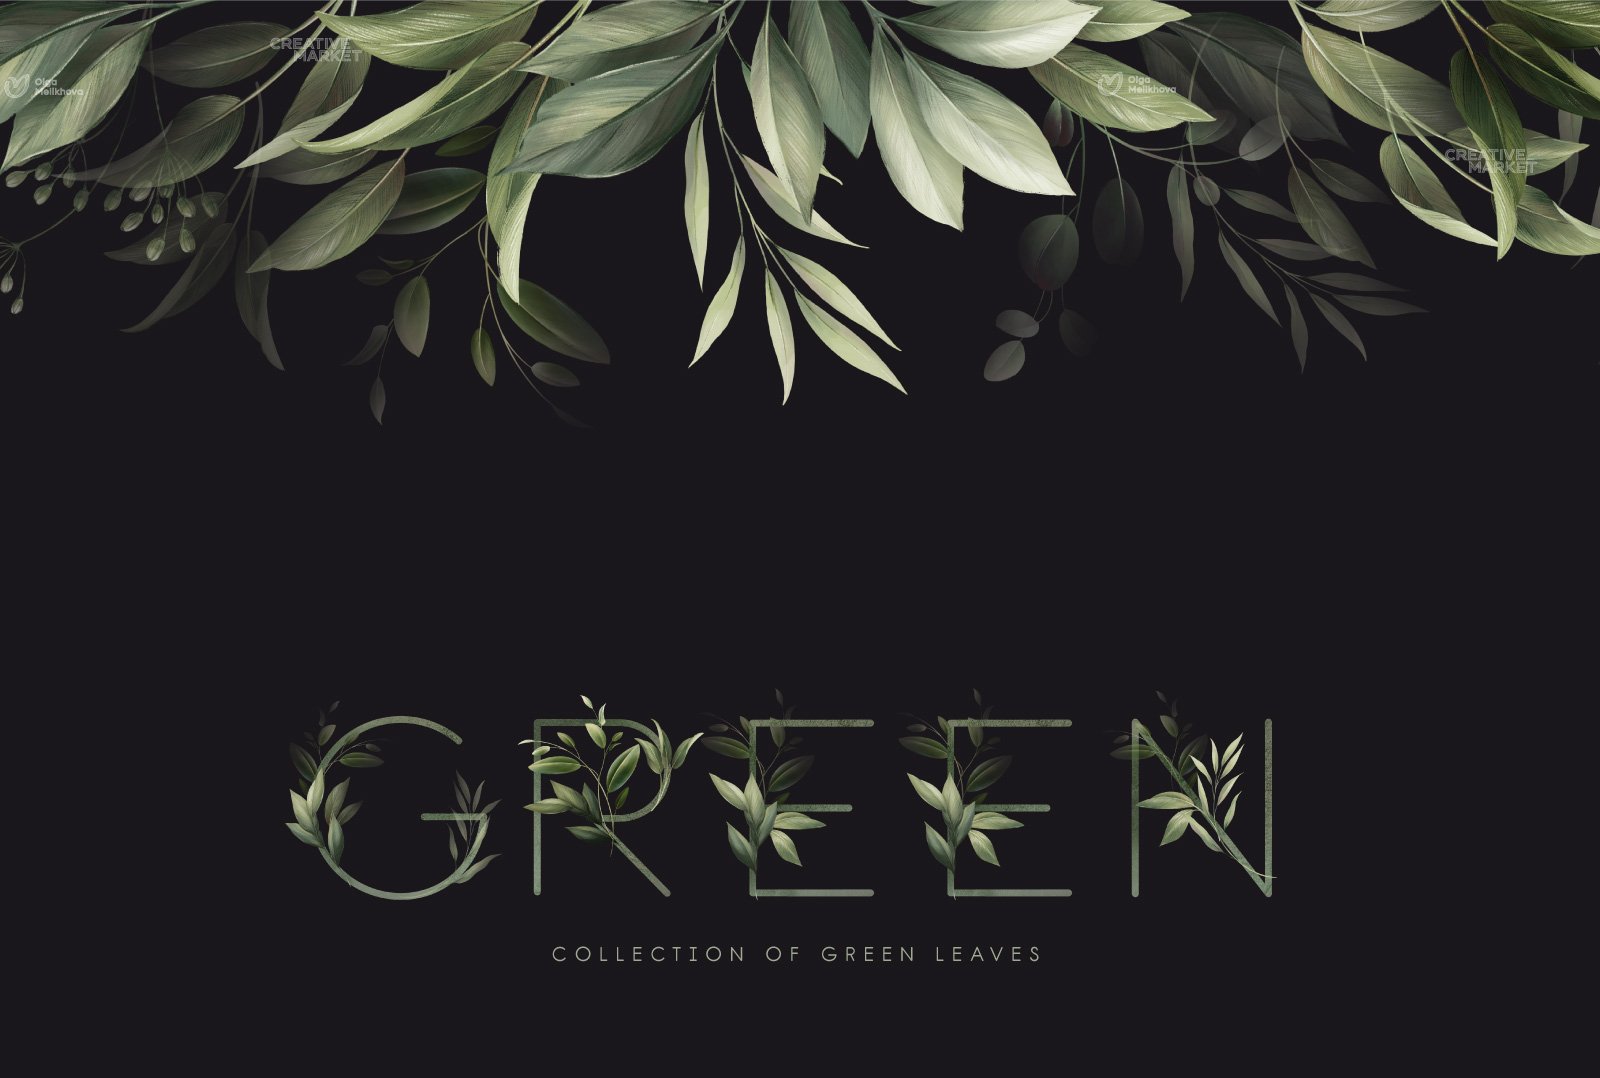 Green leaves - greenery clipart preview image.